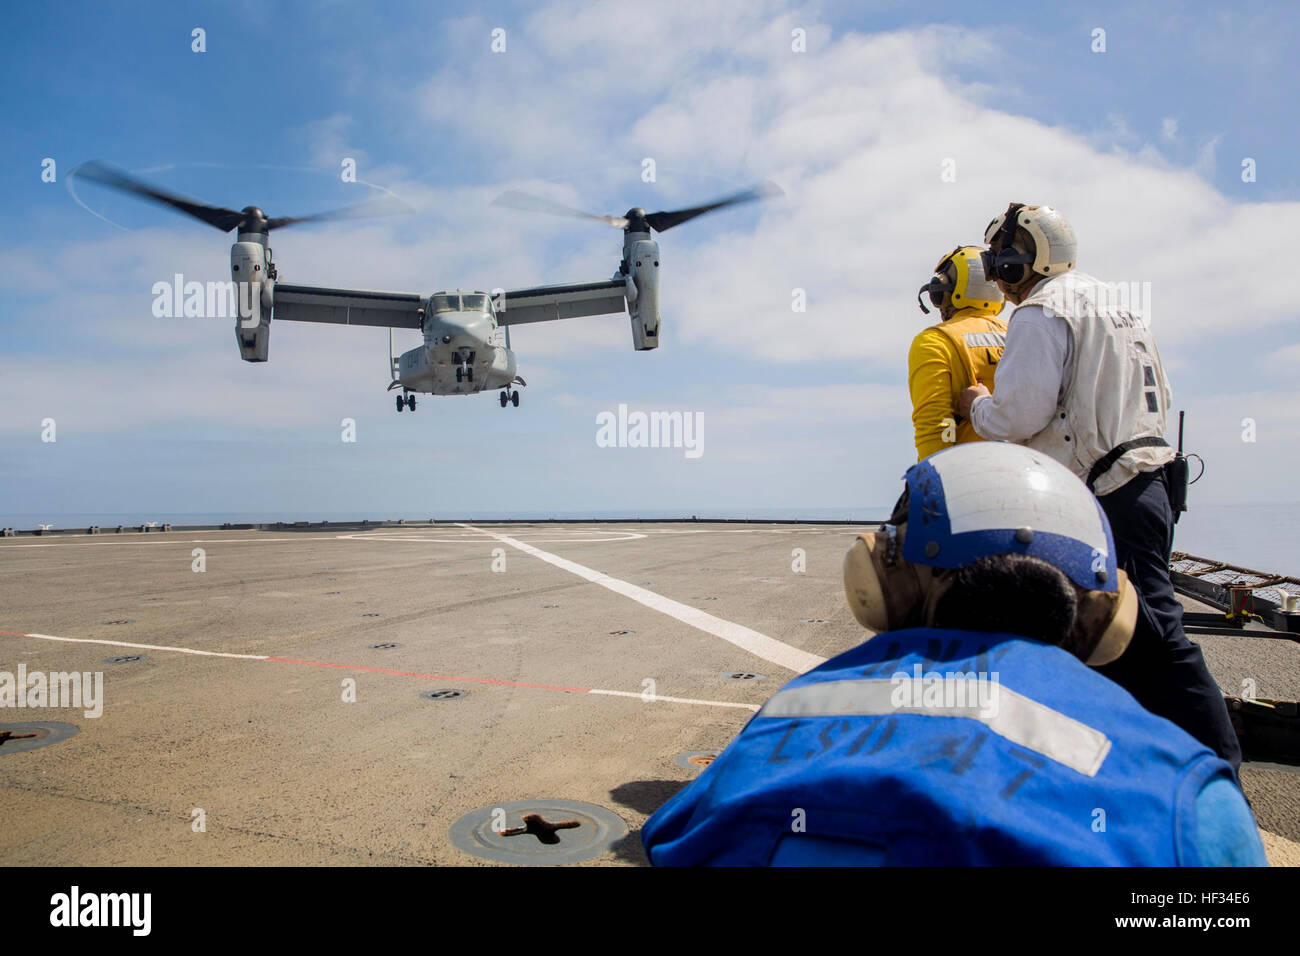 U.S. Navy Sailors guide U.S. Marine pilots with Marine Medium Tiltrotor Squadron 161 (Reinforced), 15th Marine Expeditionary Unit, onto the flight deck of the USS Rushmore (LSD 47) during Composite Training Unit Exercise (COMPTUEX) off the coast of San Diego March 20, 2015. The training prepares pilots and flight crew for similar operations they may encounter while deployed later this spring. (U.S. Marine Corps photo by Sgt. Emmanuel Ramos/Released) Setting Conditions, 15th MEU pilots train for upcoming deployment 150320-M-ST621-427 Stock Photo